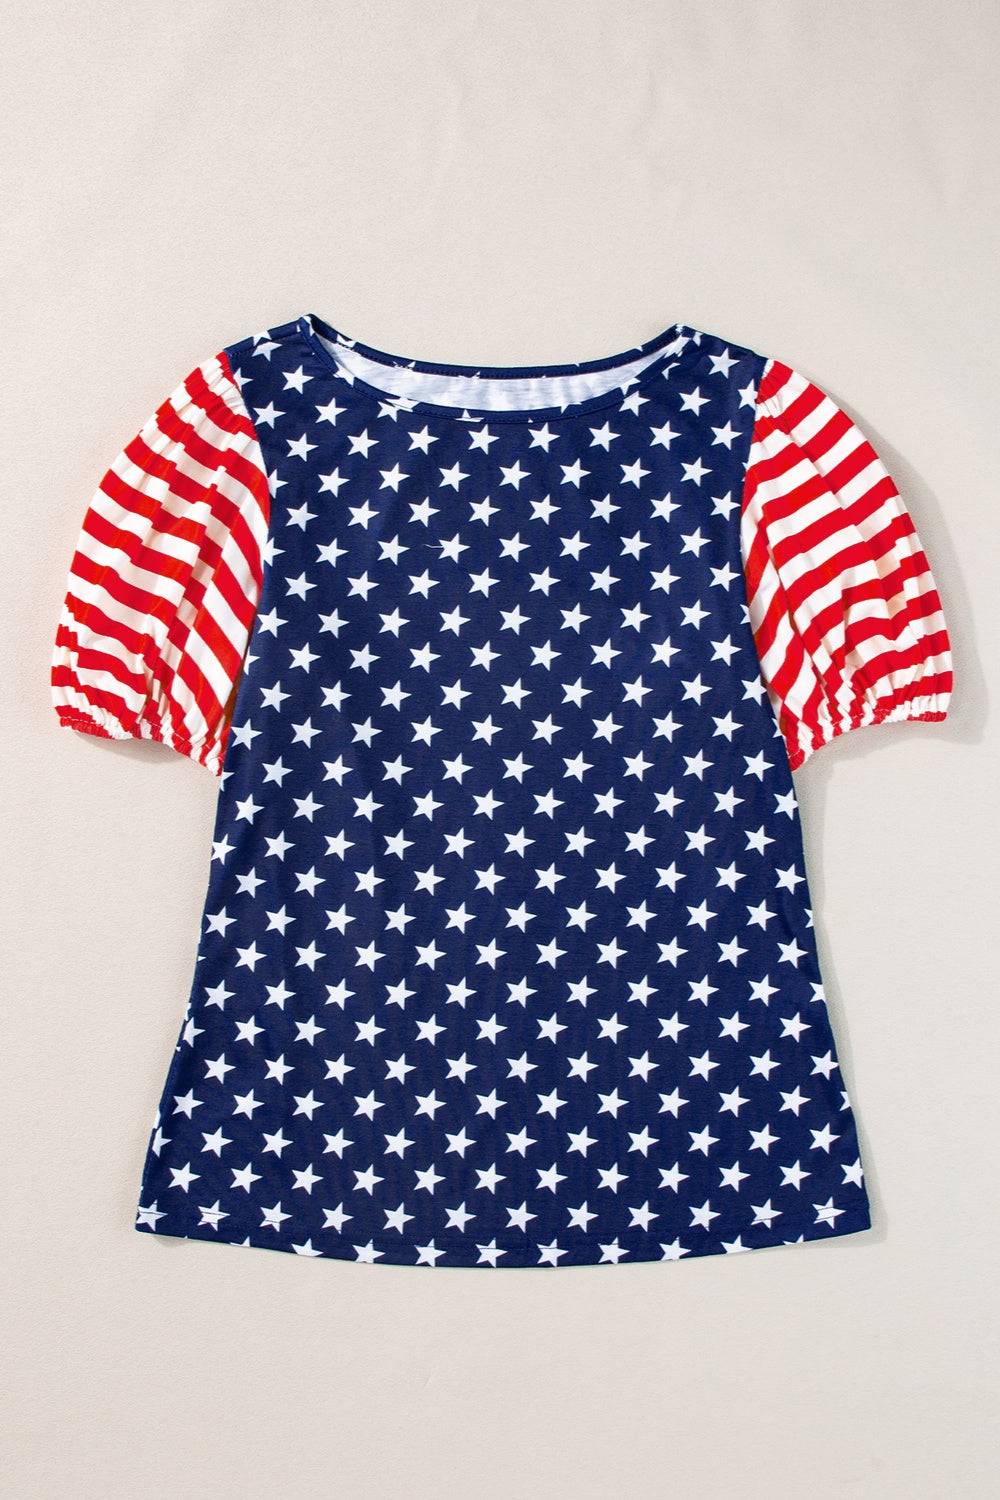 a red, white and blue dress with stars on it